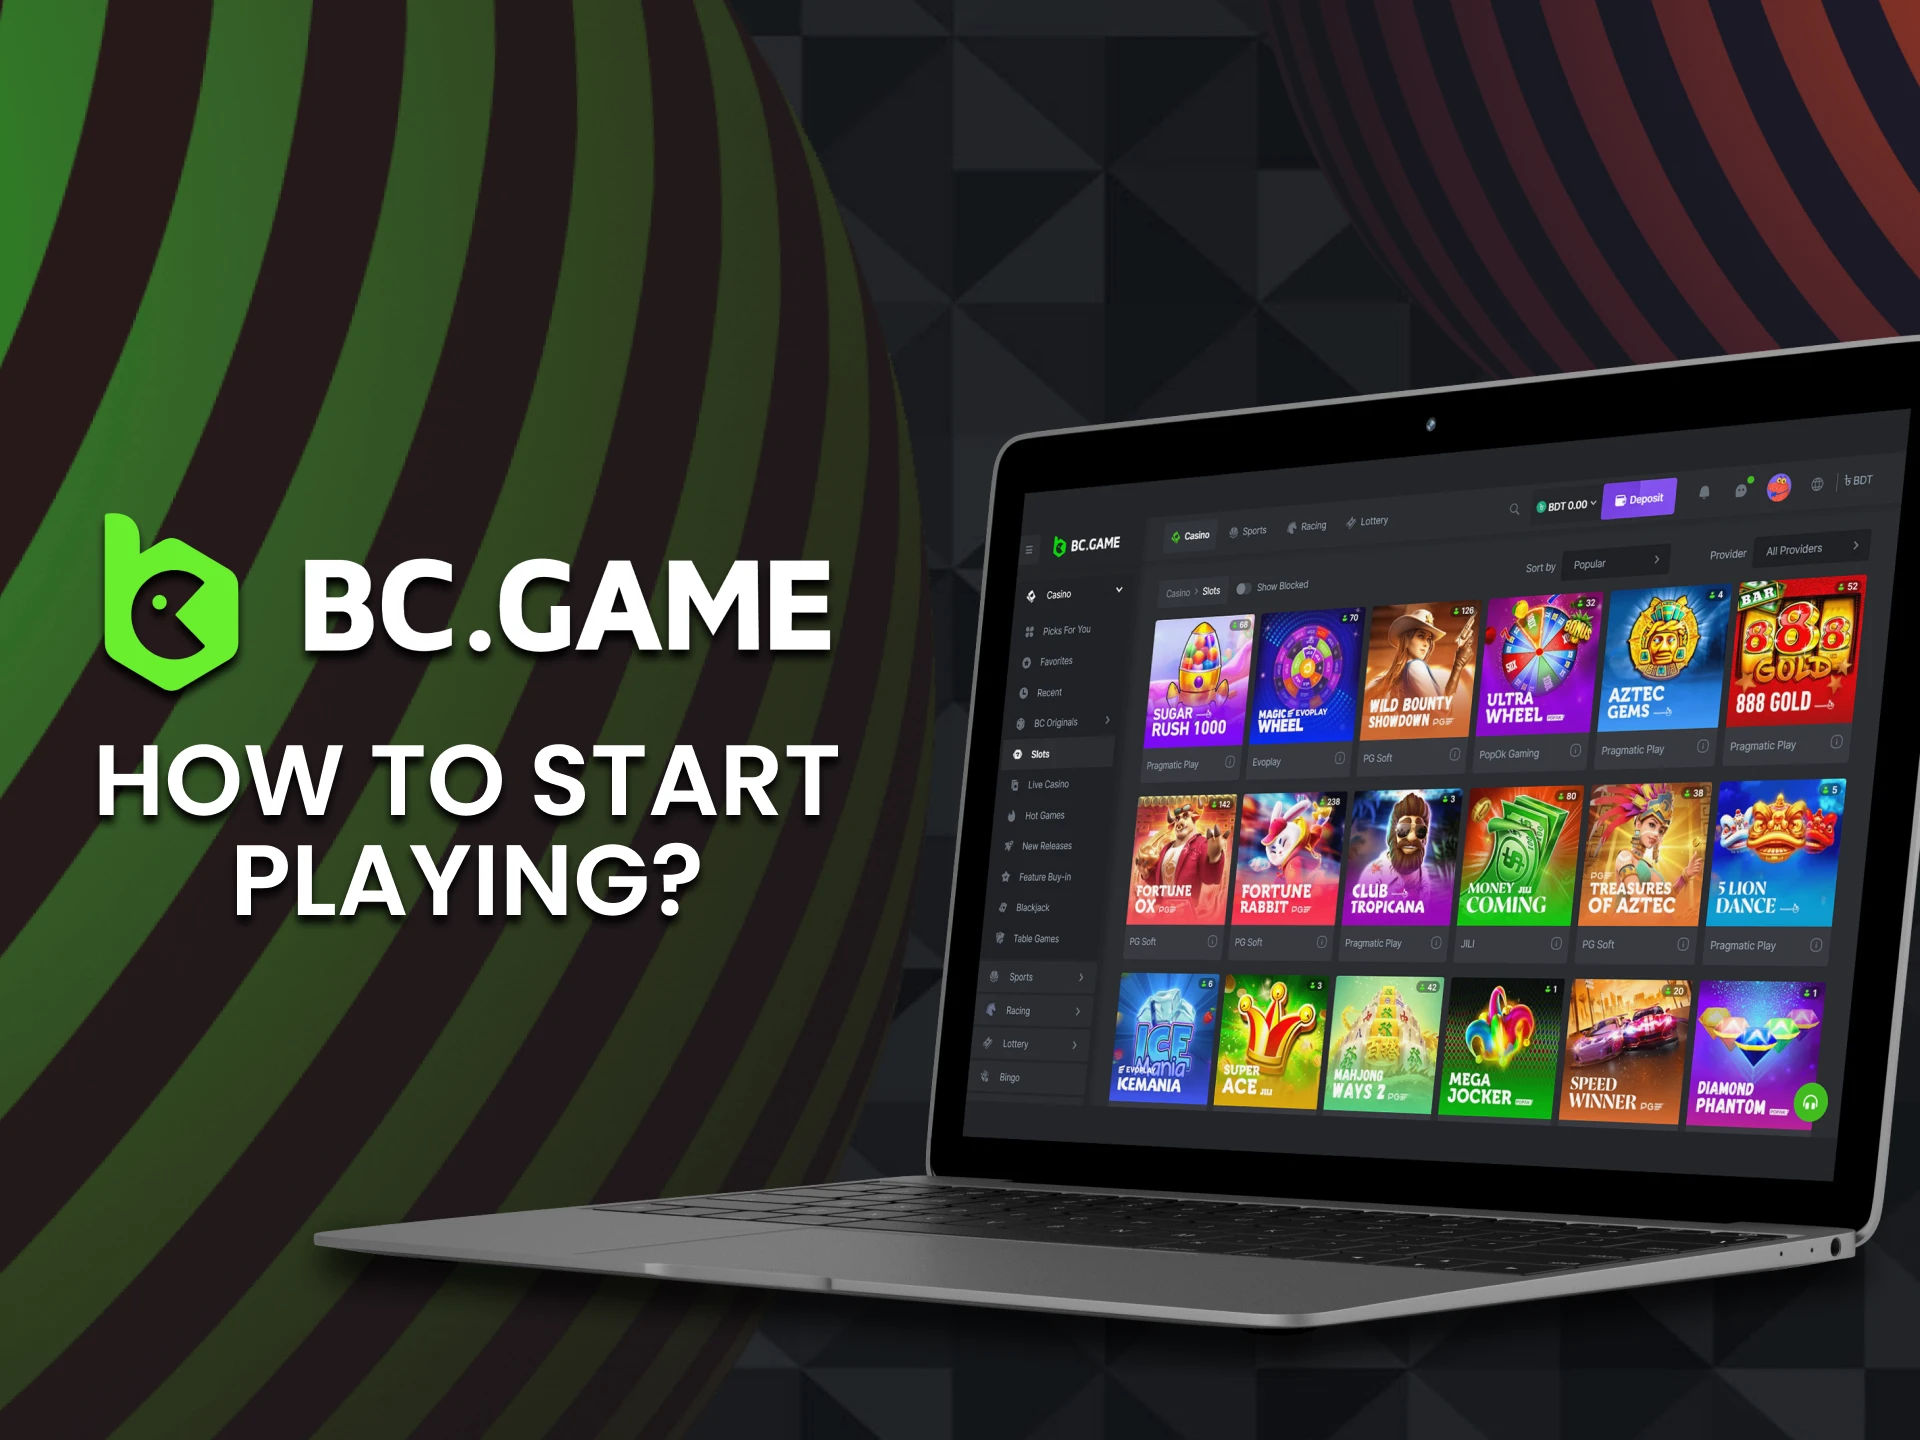 Go to the casino section and choose a slot at BC Game casino section to start playing.